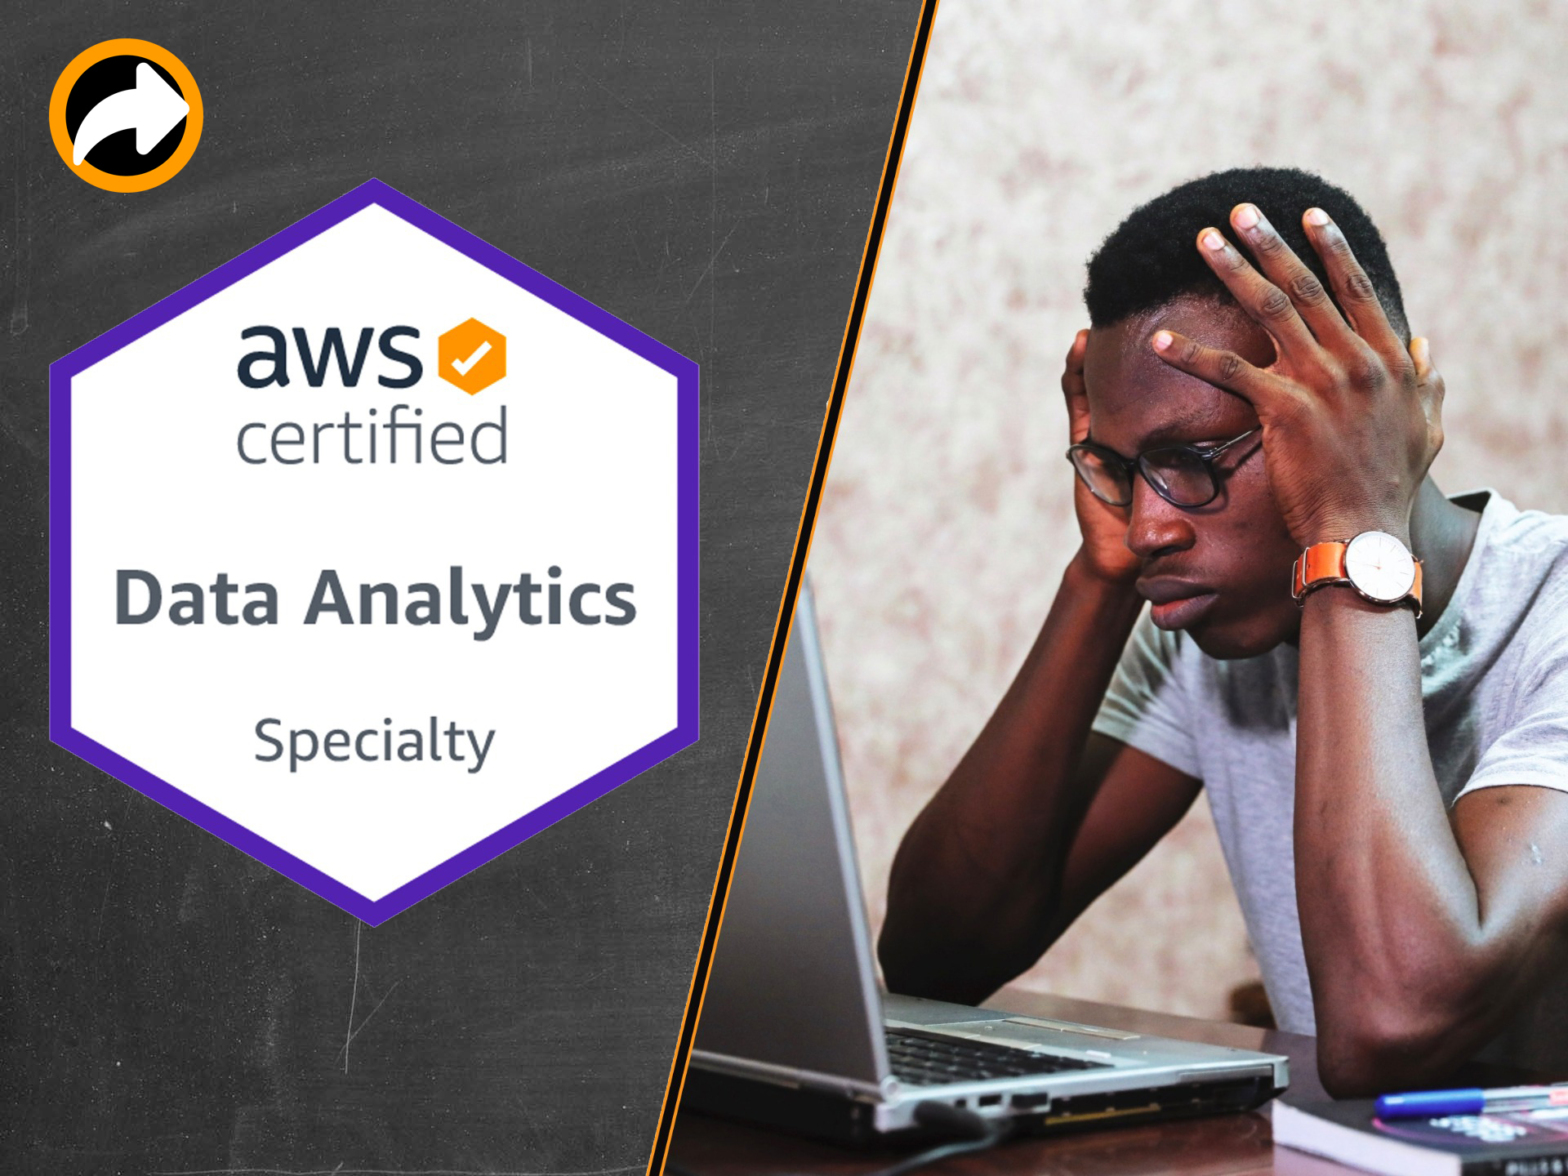 AWS Specialty Certification as a Product Manager